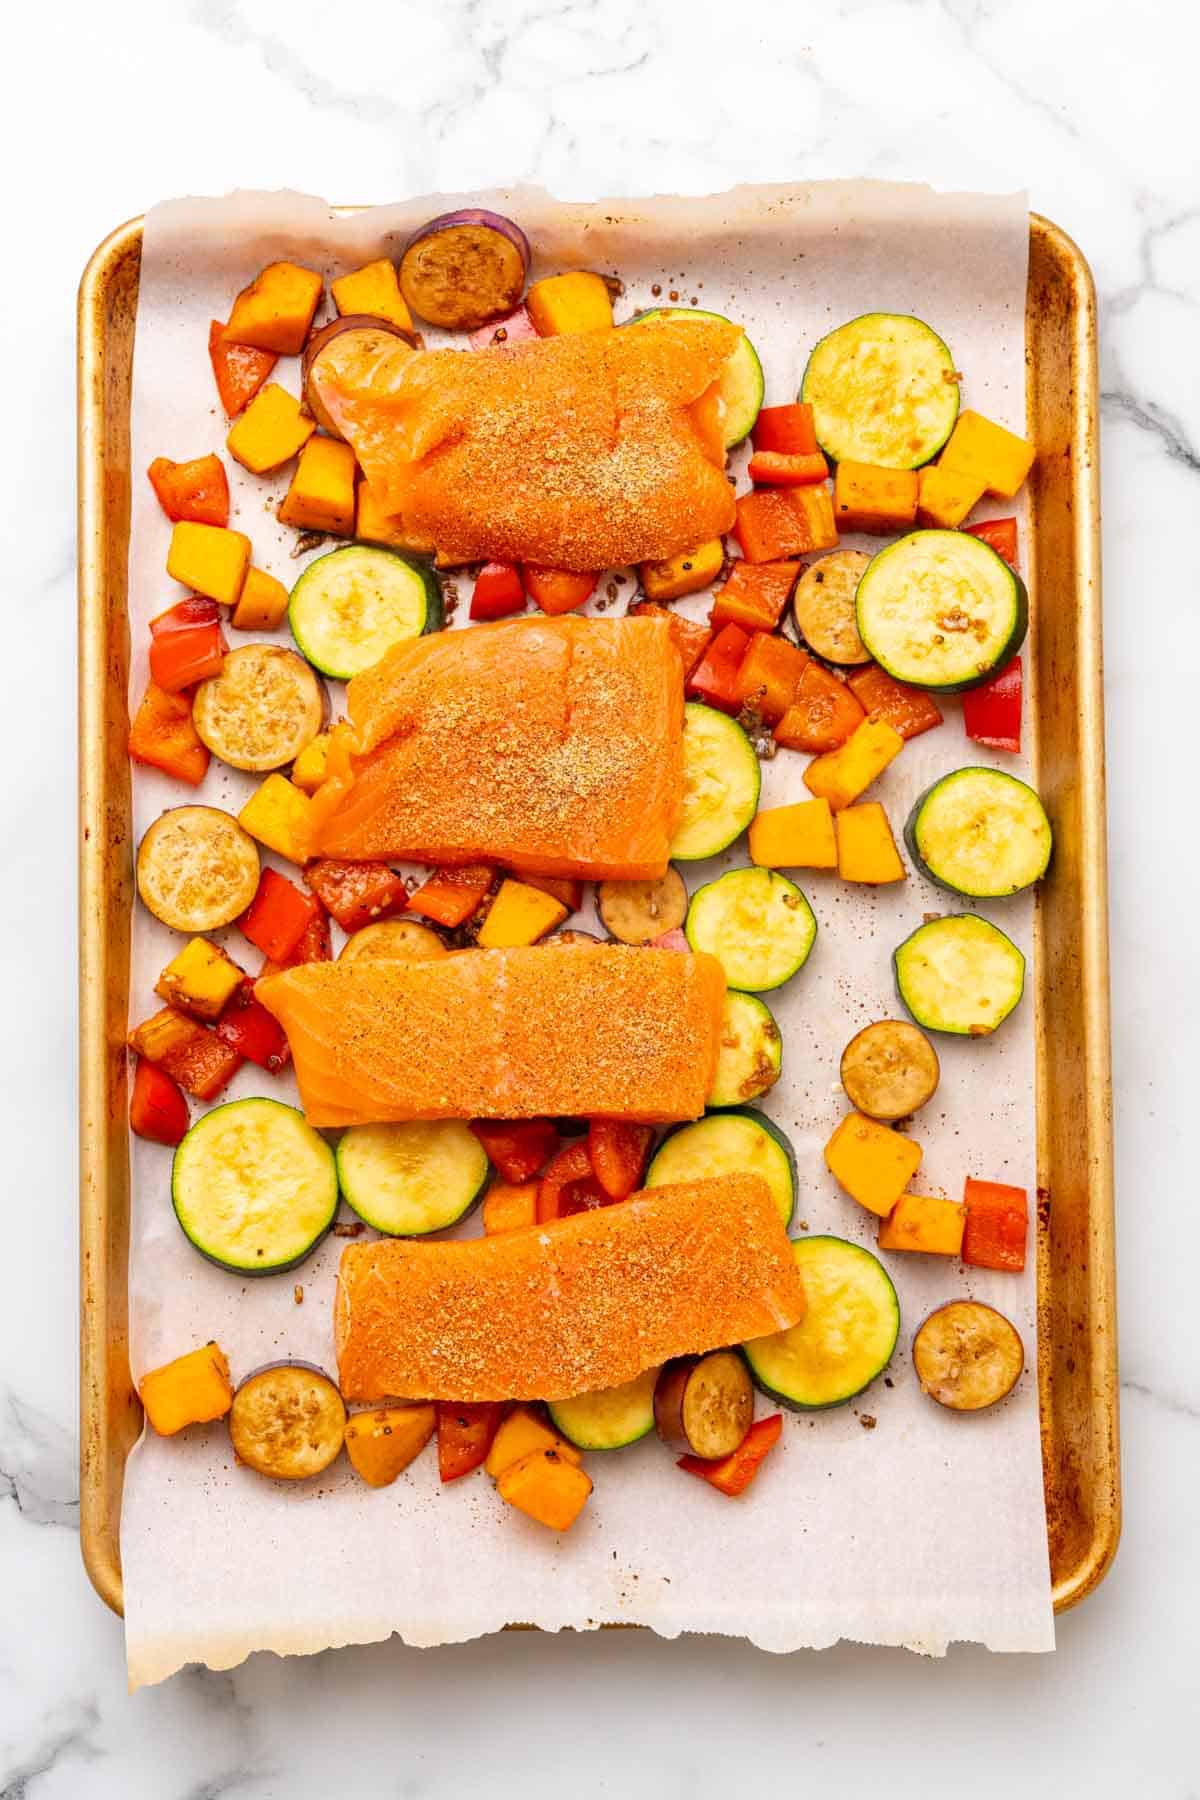 Four salmon filets laid on top of roasted veggies on a baking tray lined with parchment paper, as seen from above on a white marble countertop